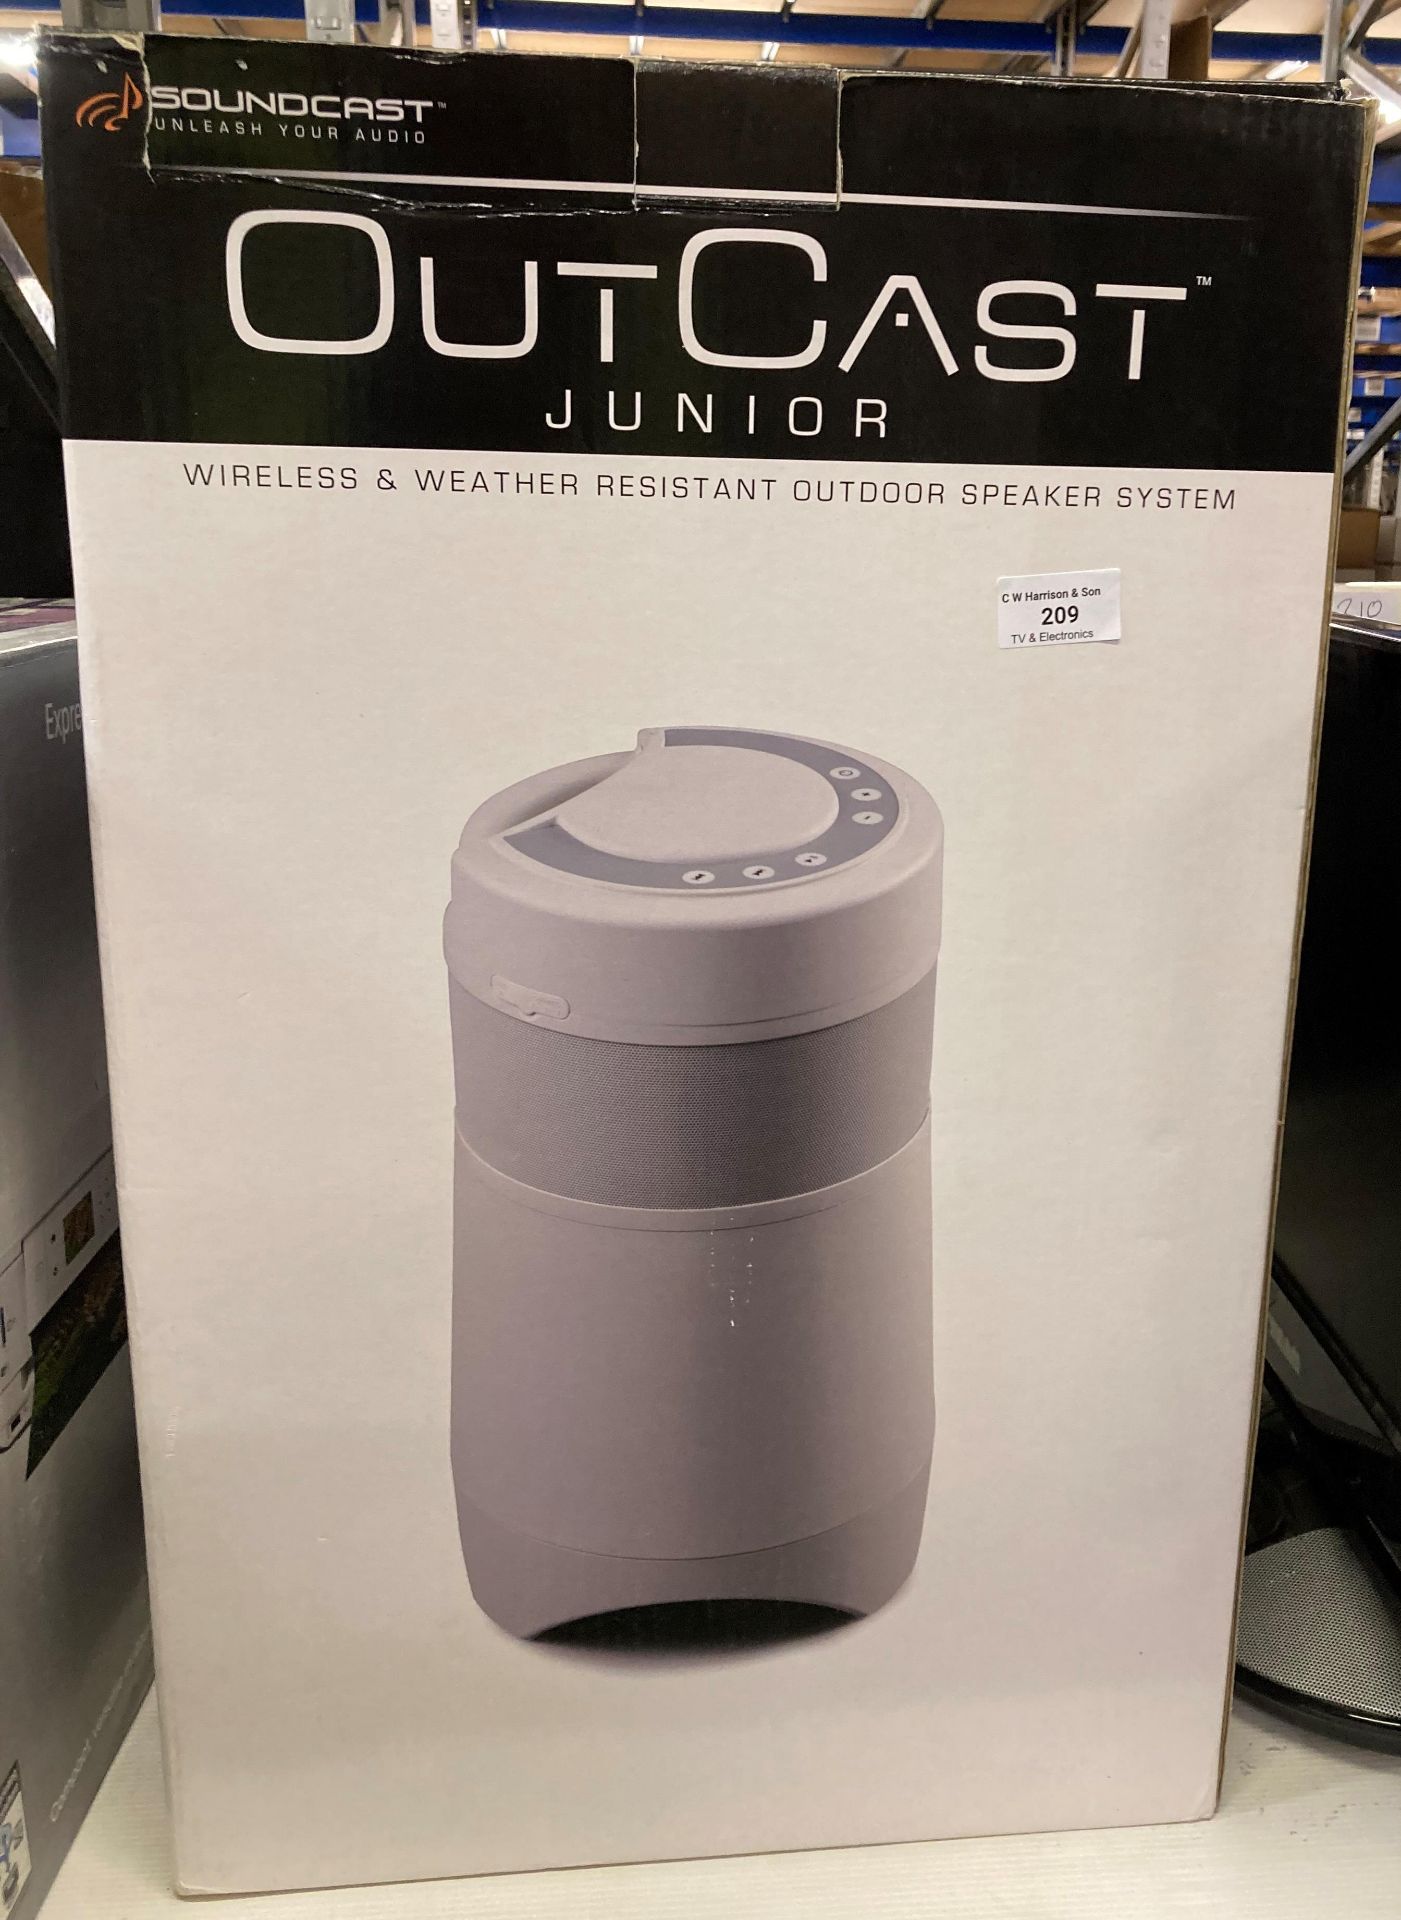 Outcast Junior wireless & weather resistant outdoor speaker system complete with power lead and